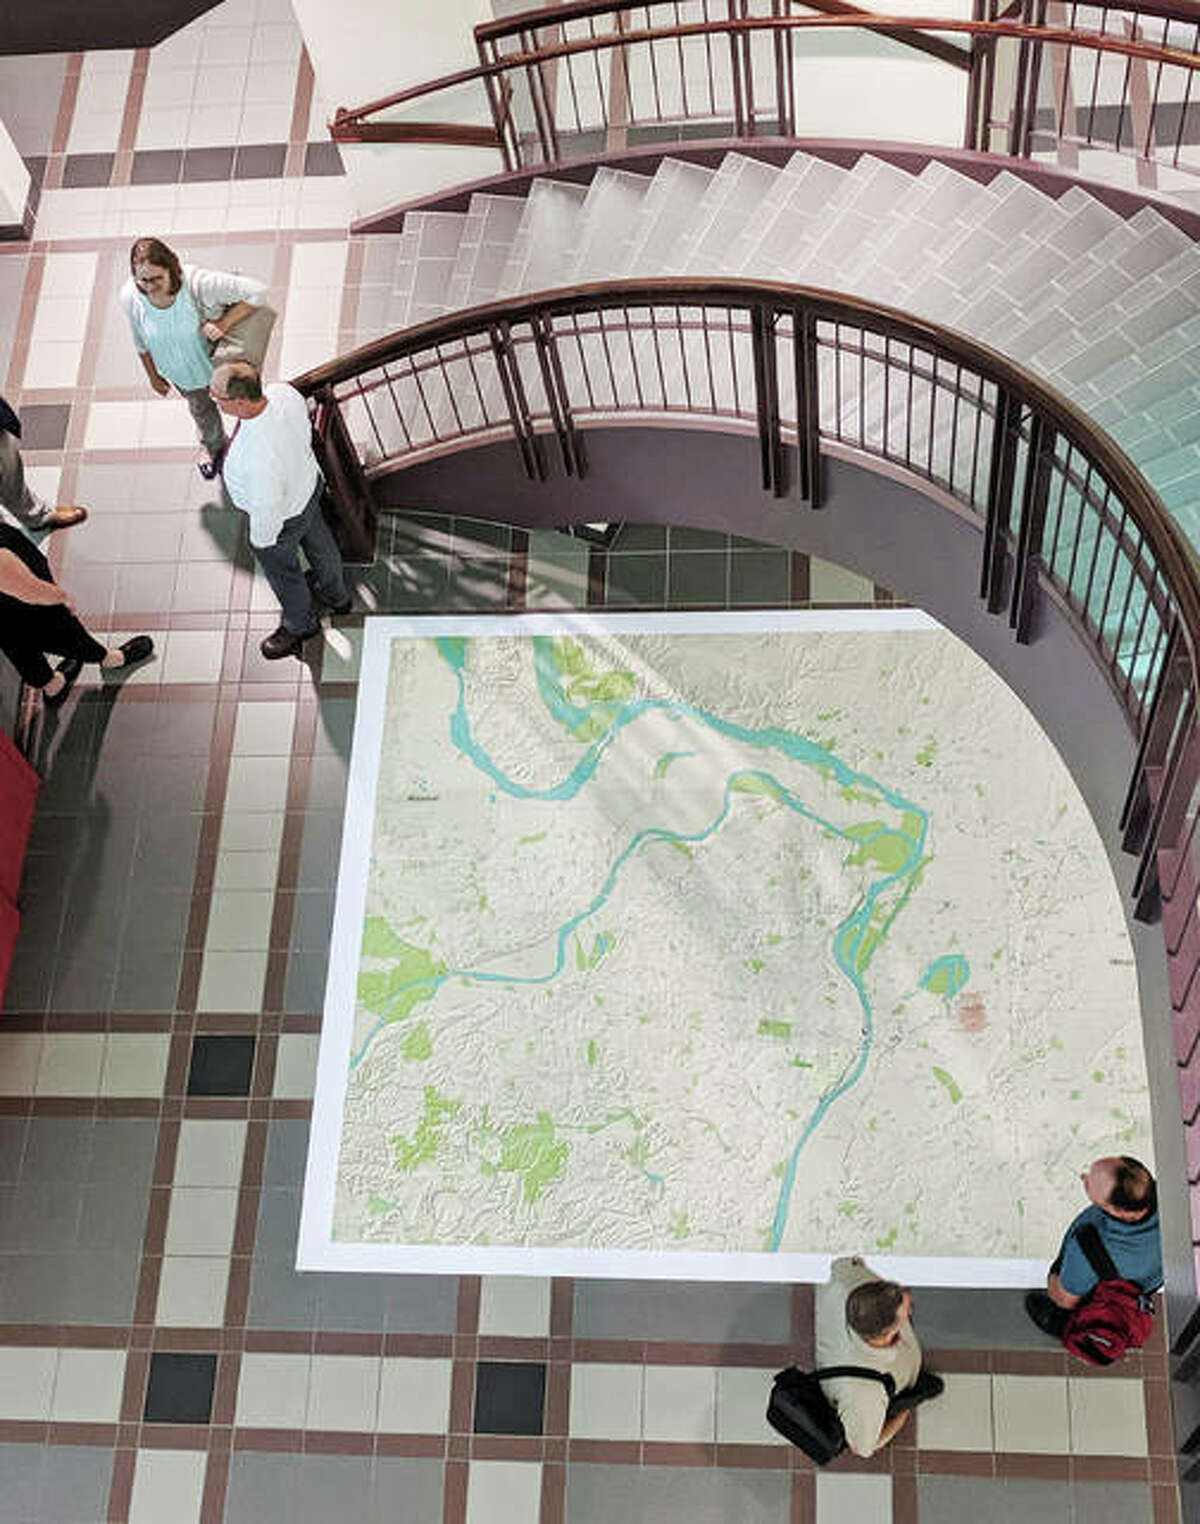 A large map of the Cahokia Mounds region was placed on the floor of the Madison County Administration Building’s lobby Wednesday. County board members approved $25,000 for efforts to make Cahokia Mounds part of the National Park System one day before U.S. Rep. Mike Bost introduced legislation to include Cahokia Mounds and related sites in the national park system.